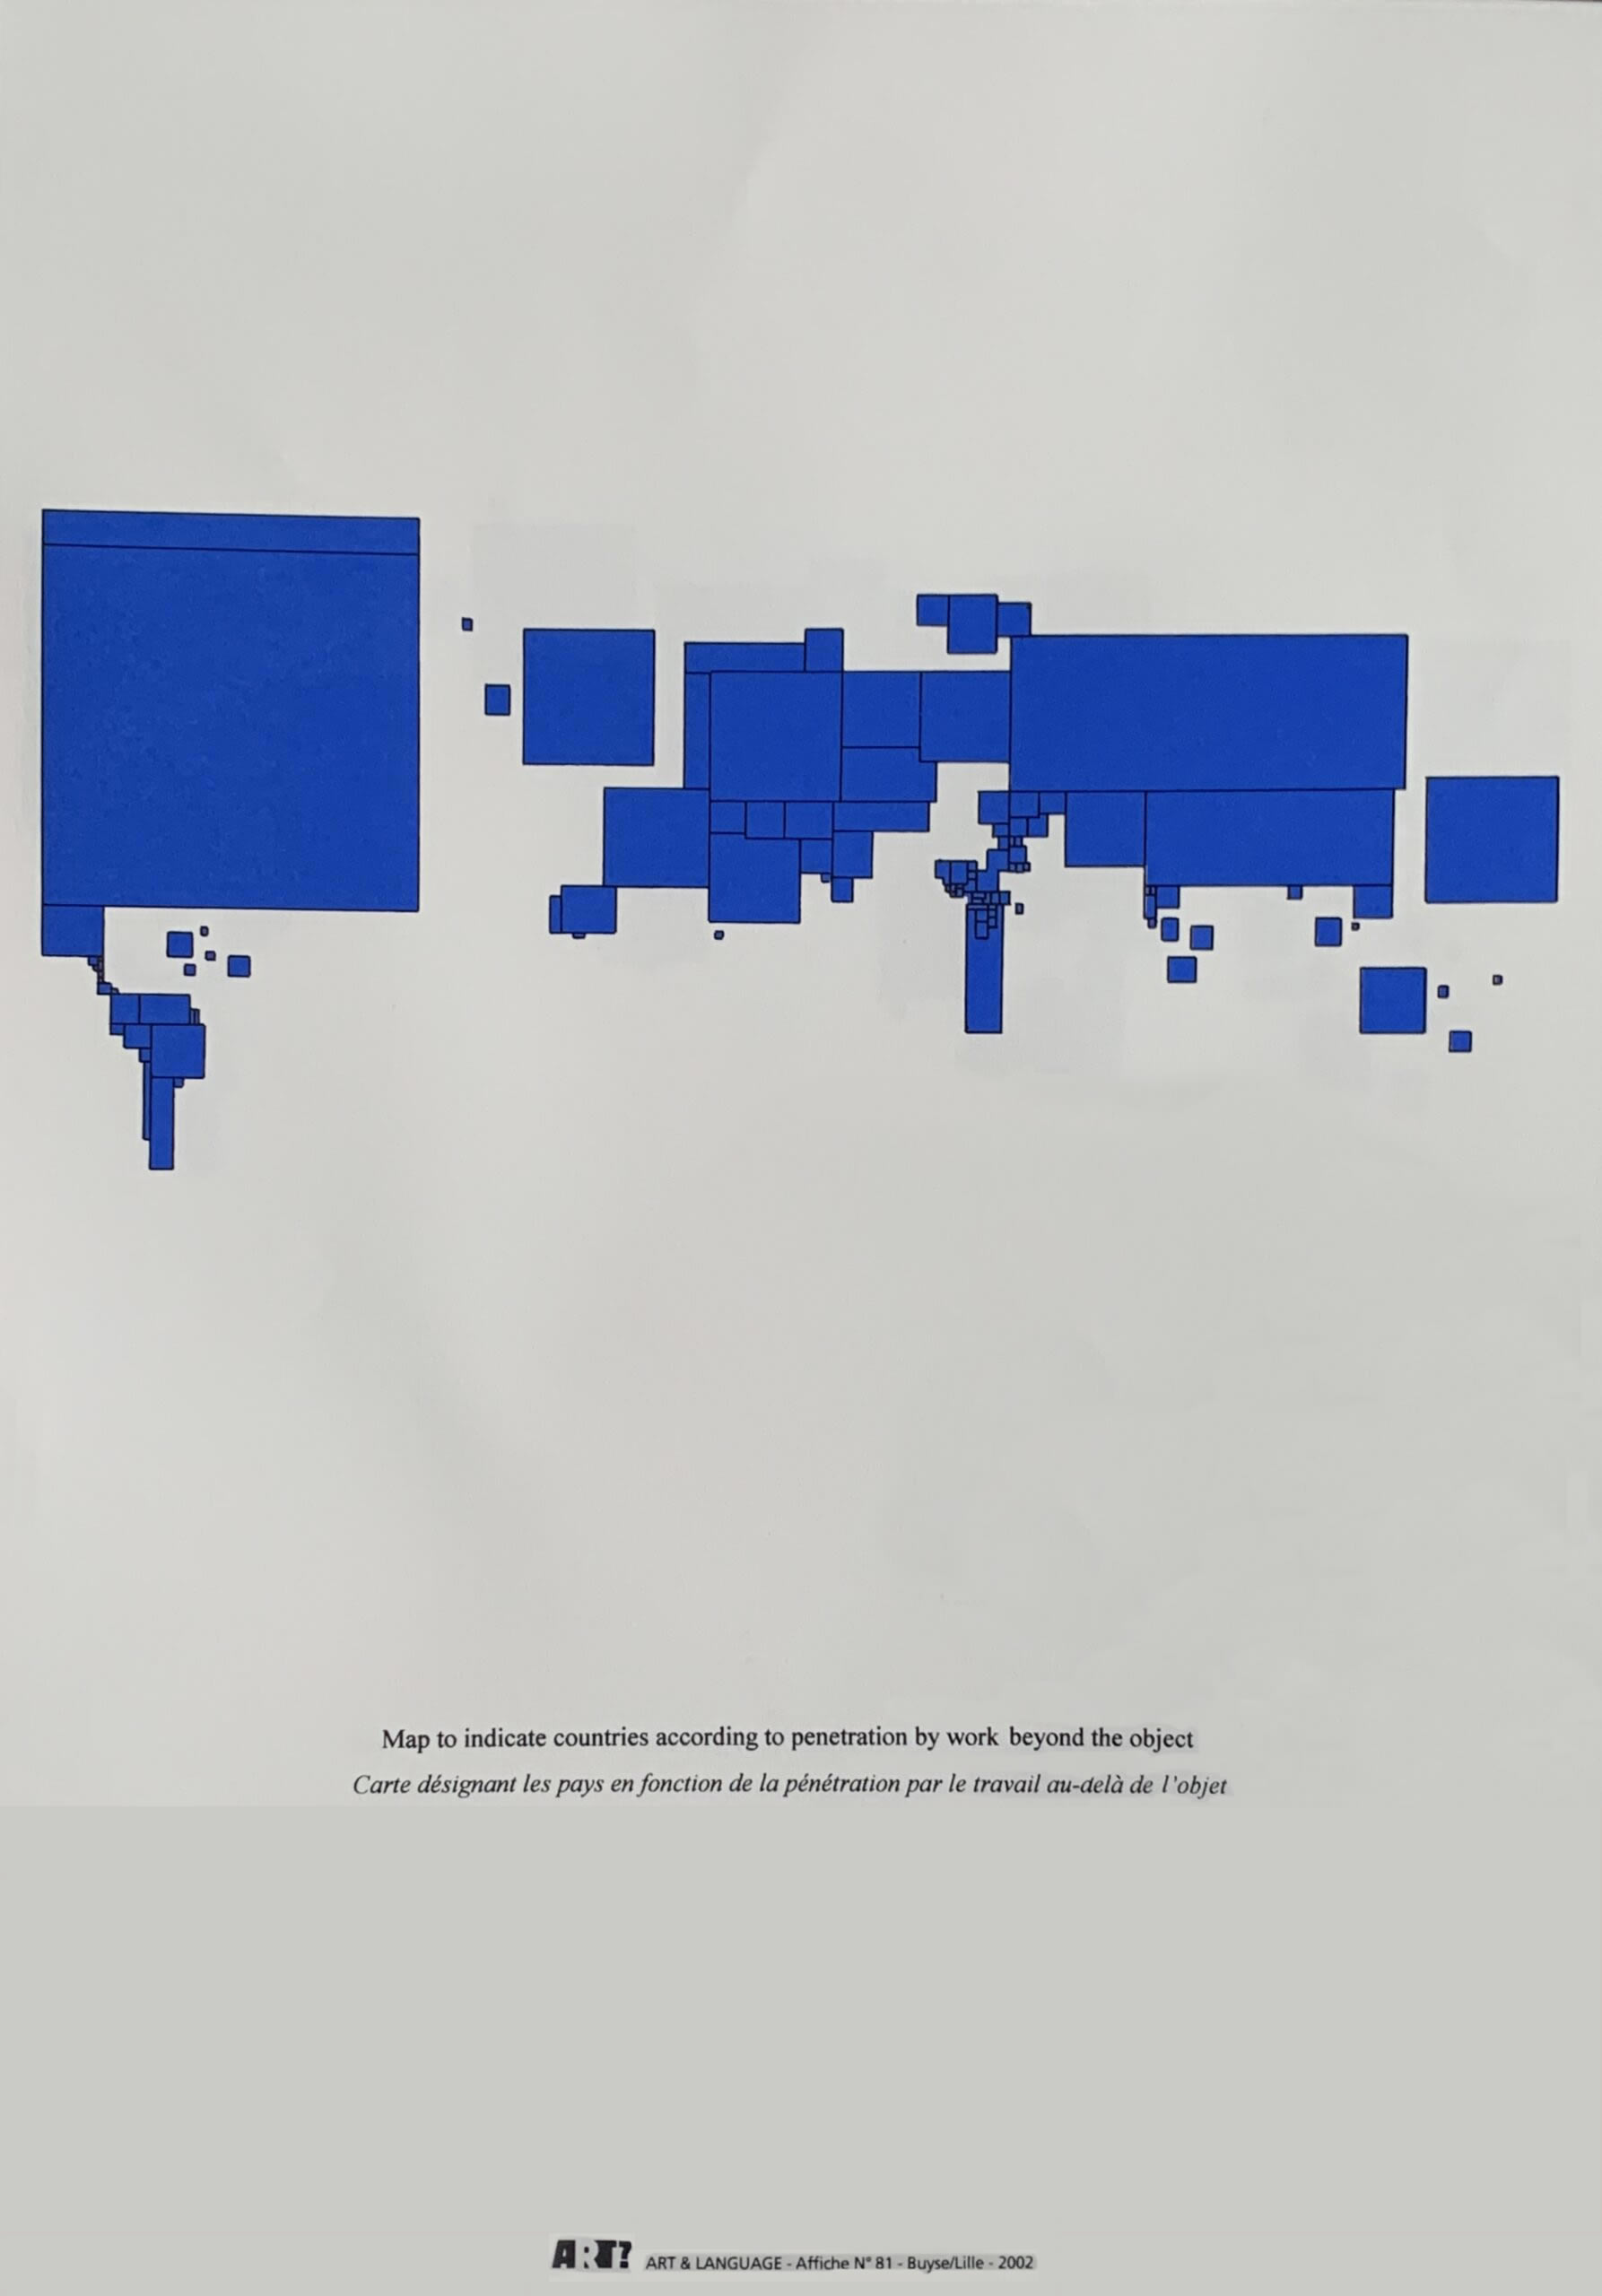 Art & Language: Map to indicate..., Edition of 50 (58 x 35 cm) 2002.